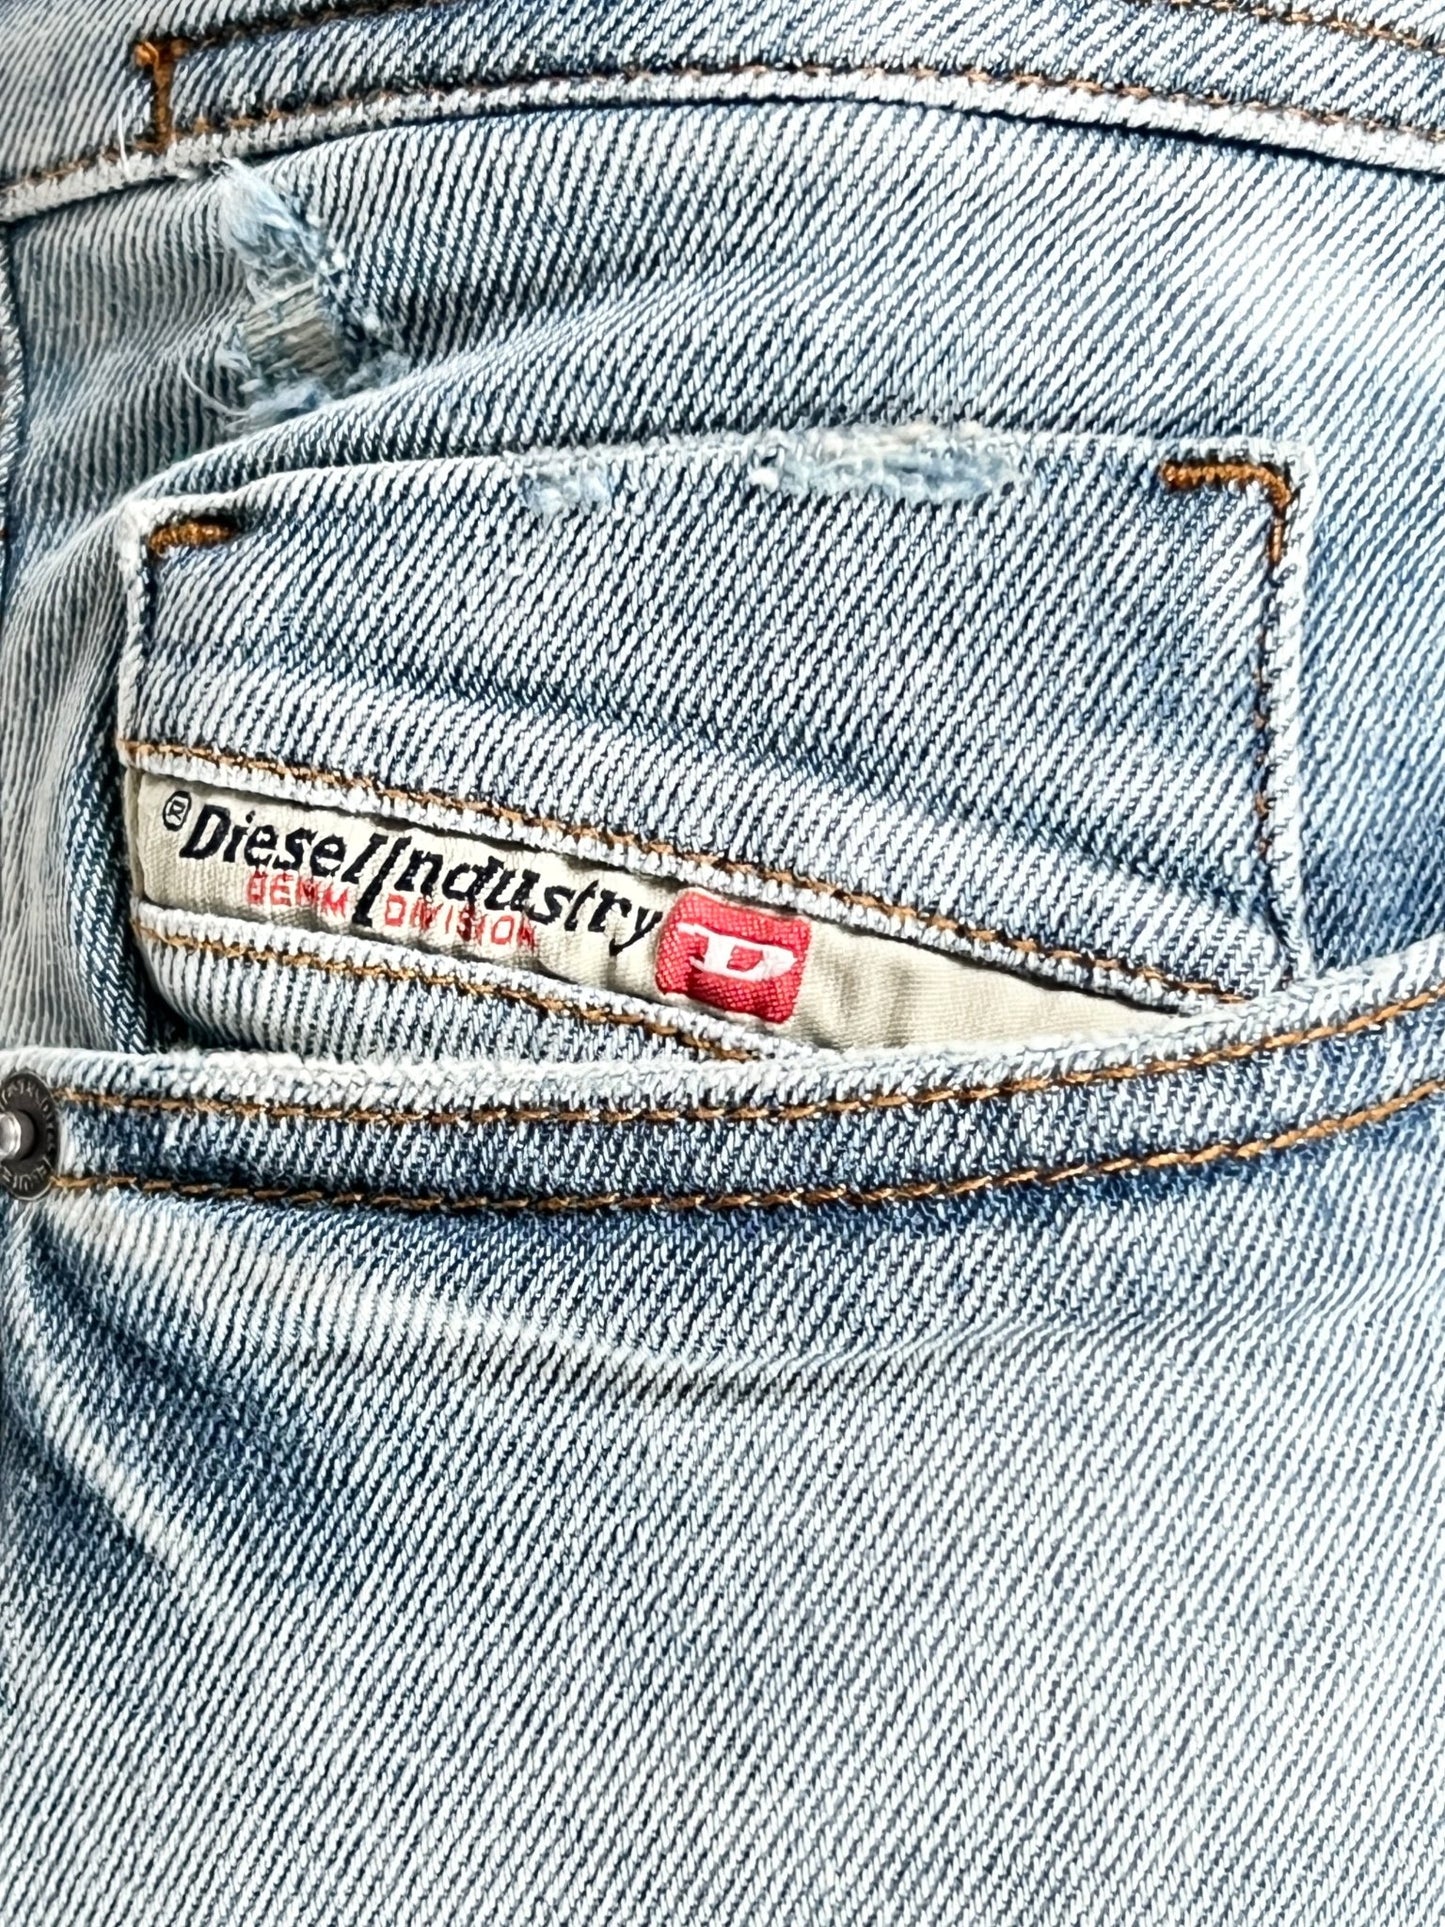 Close-up of a DIESEL 1979 SLEENKER 9H73 brand label on a pair of low waist jeans.